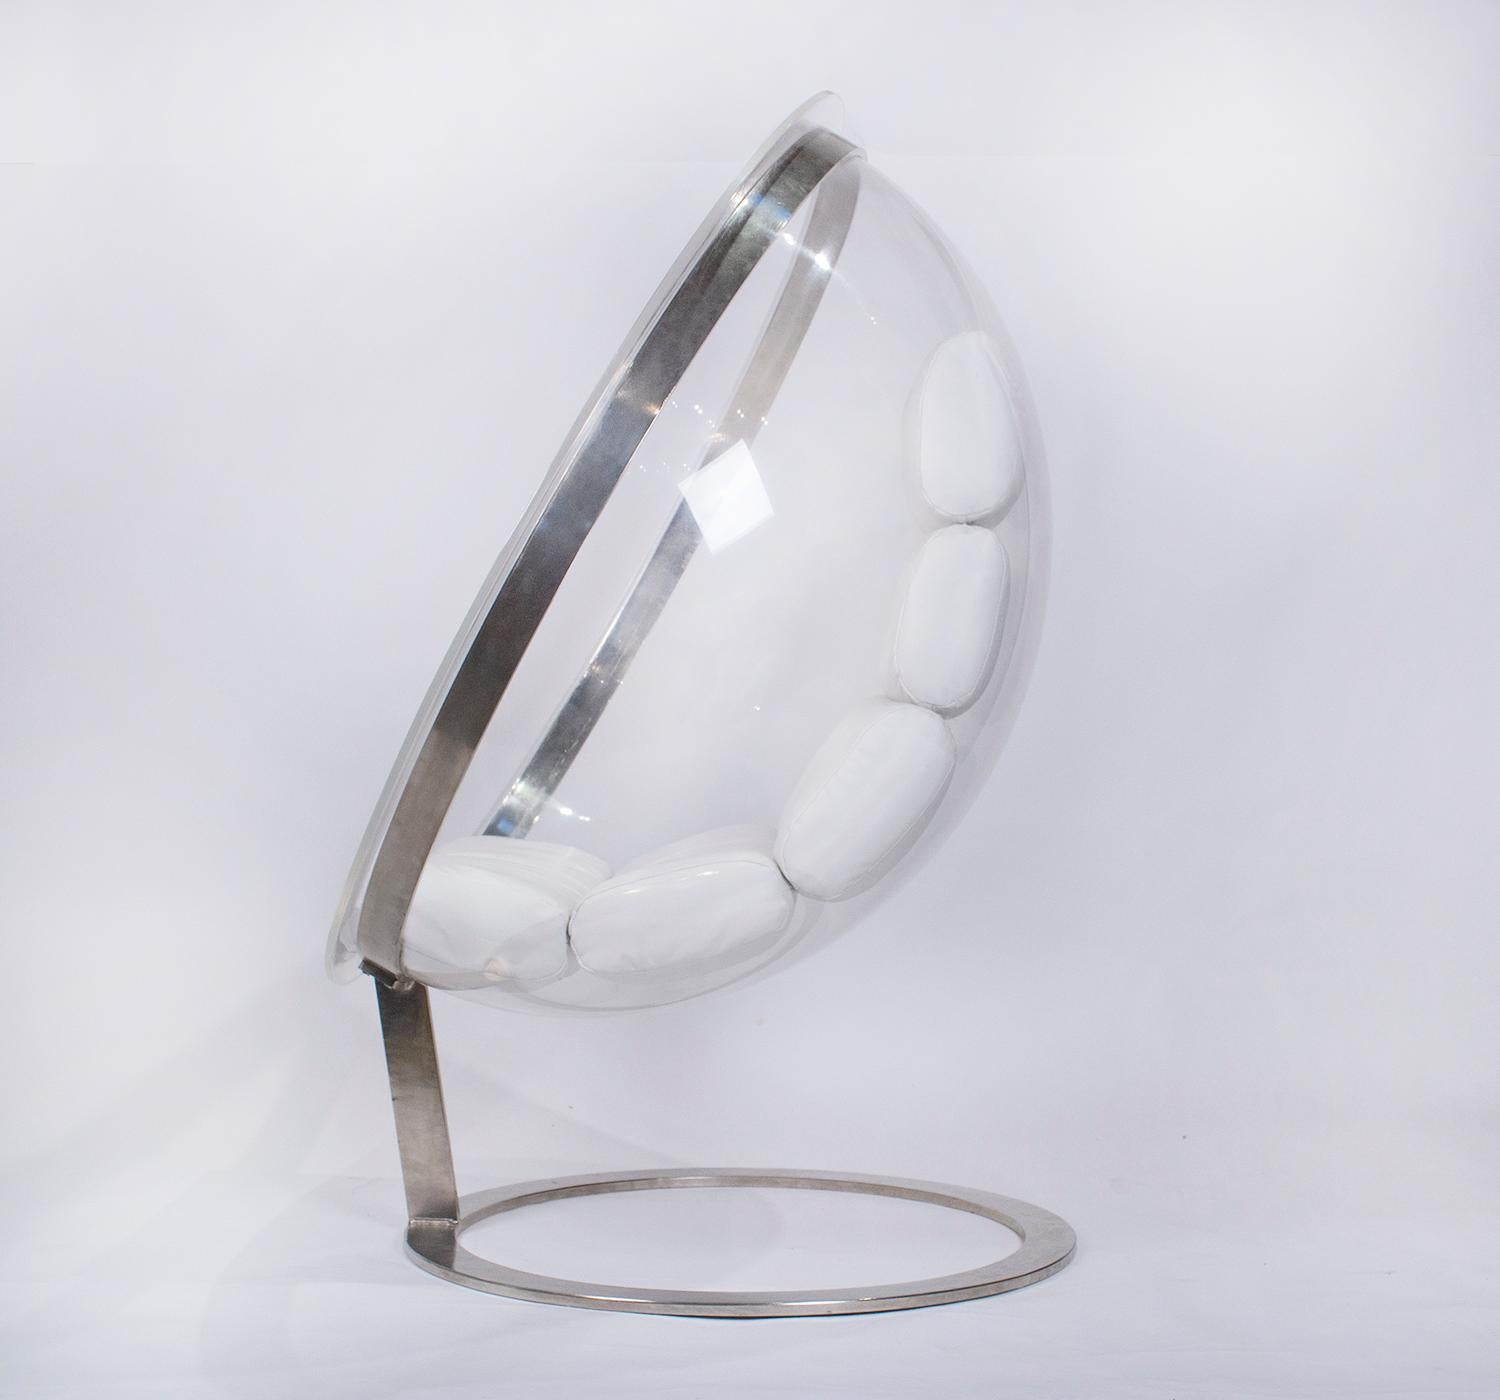 20th Century Acrylic Bubble Chair by Christian Daninos, First Edition 